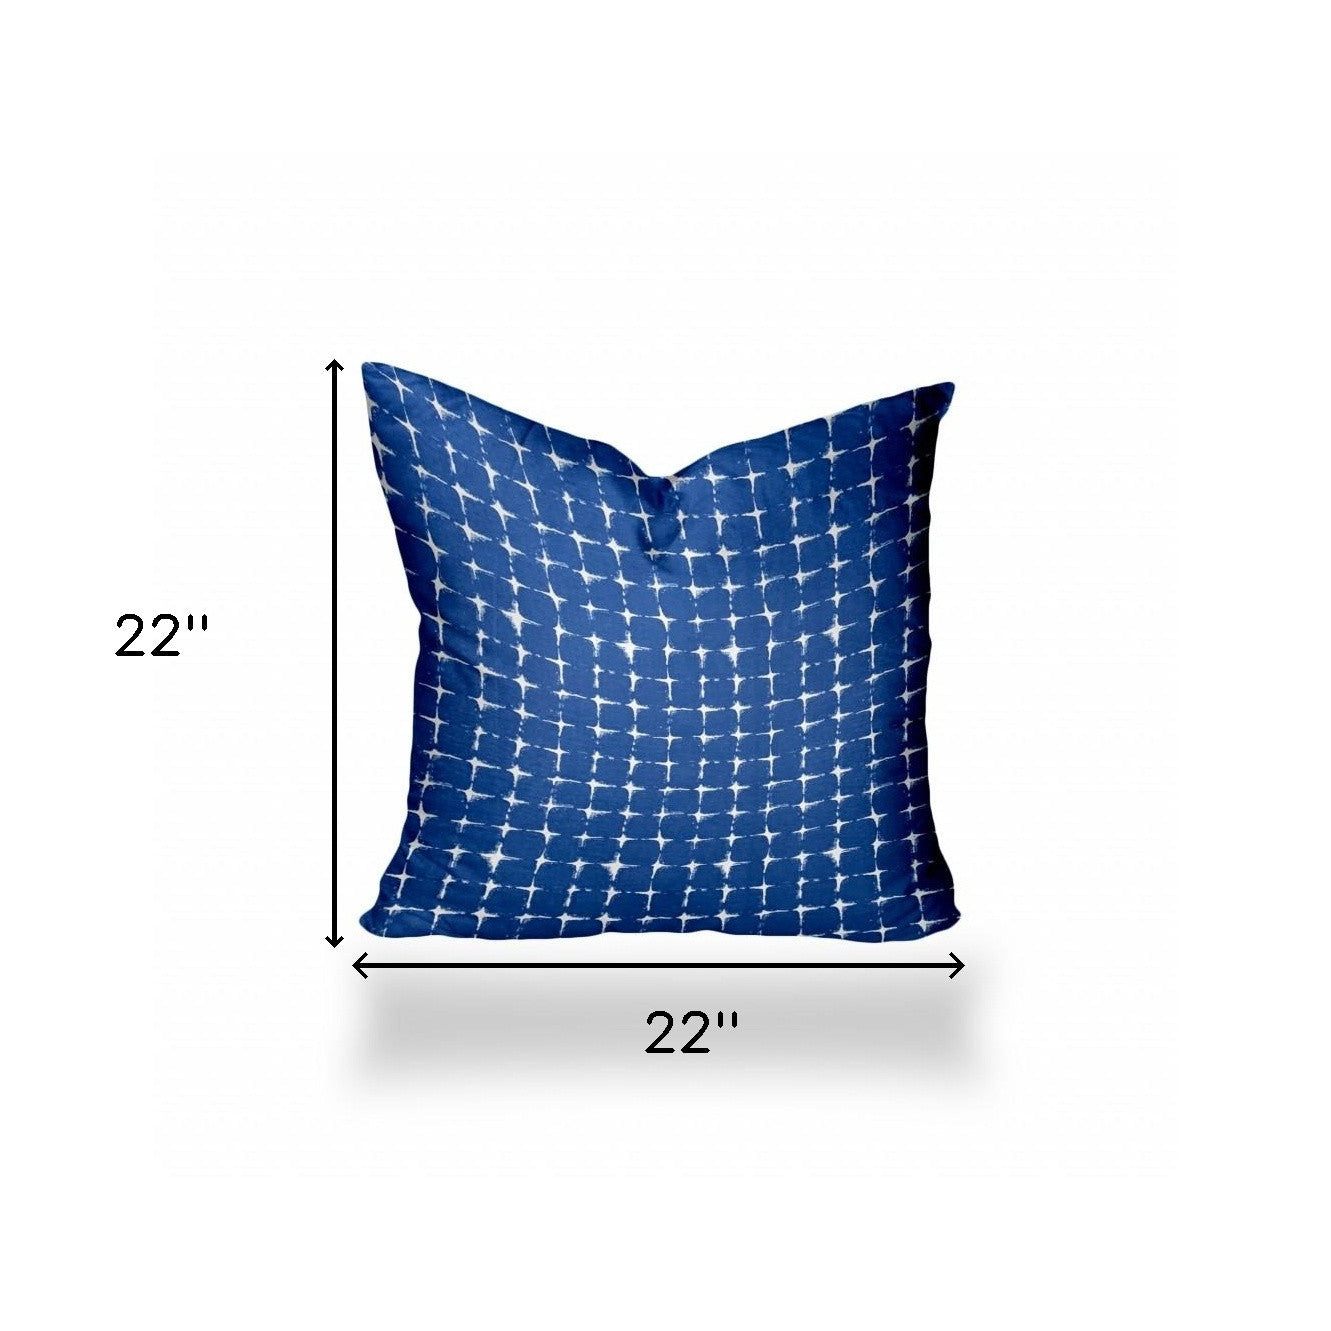 22" X 22" Blue And White Zippered Gingham Throw Indoor Outdoor Pillow Cover